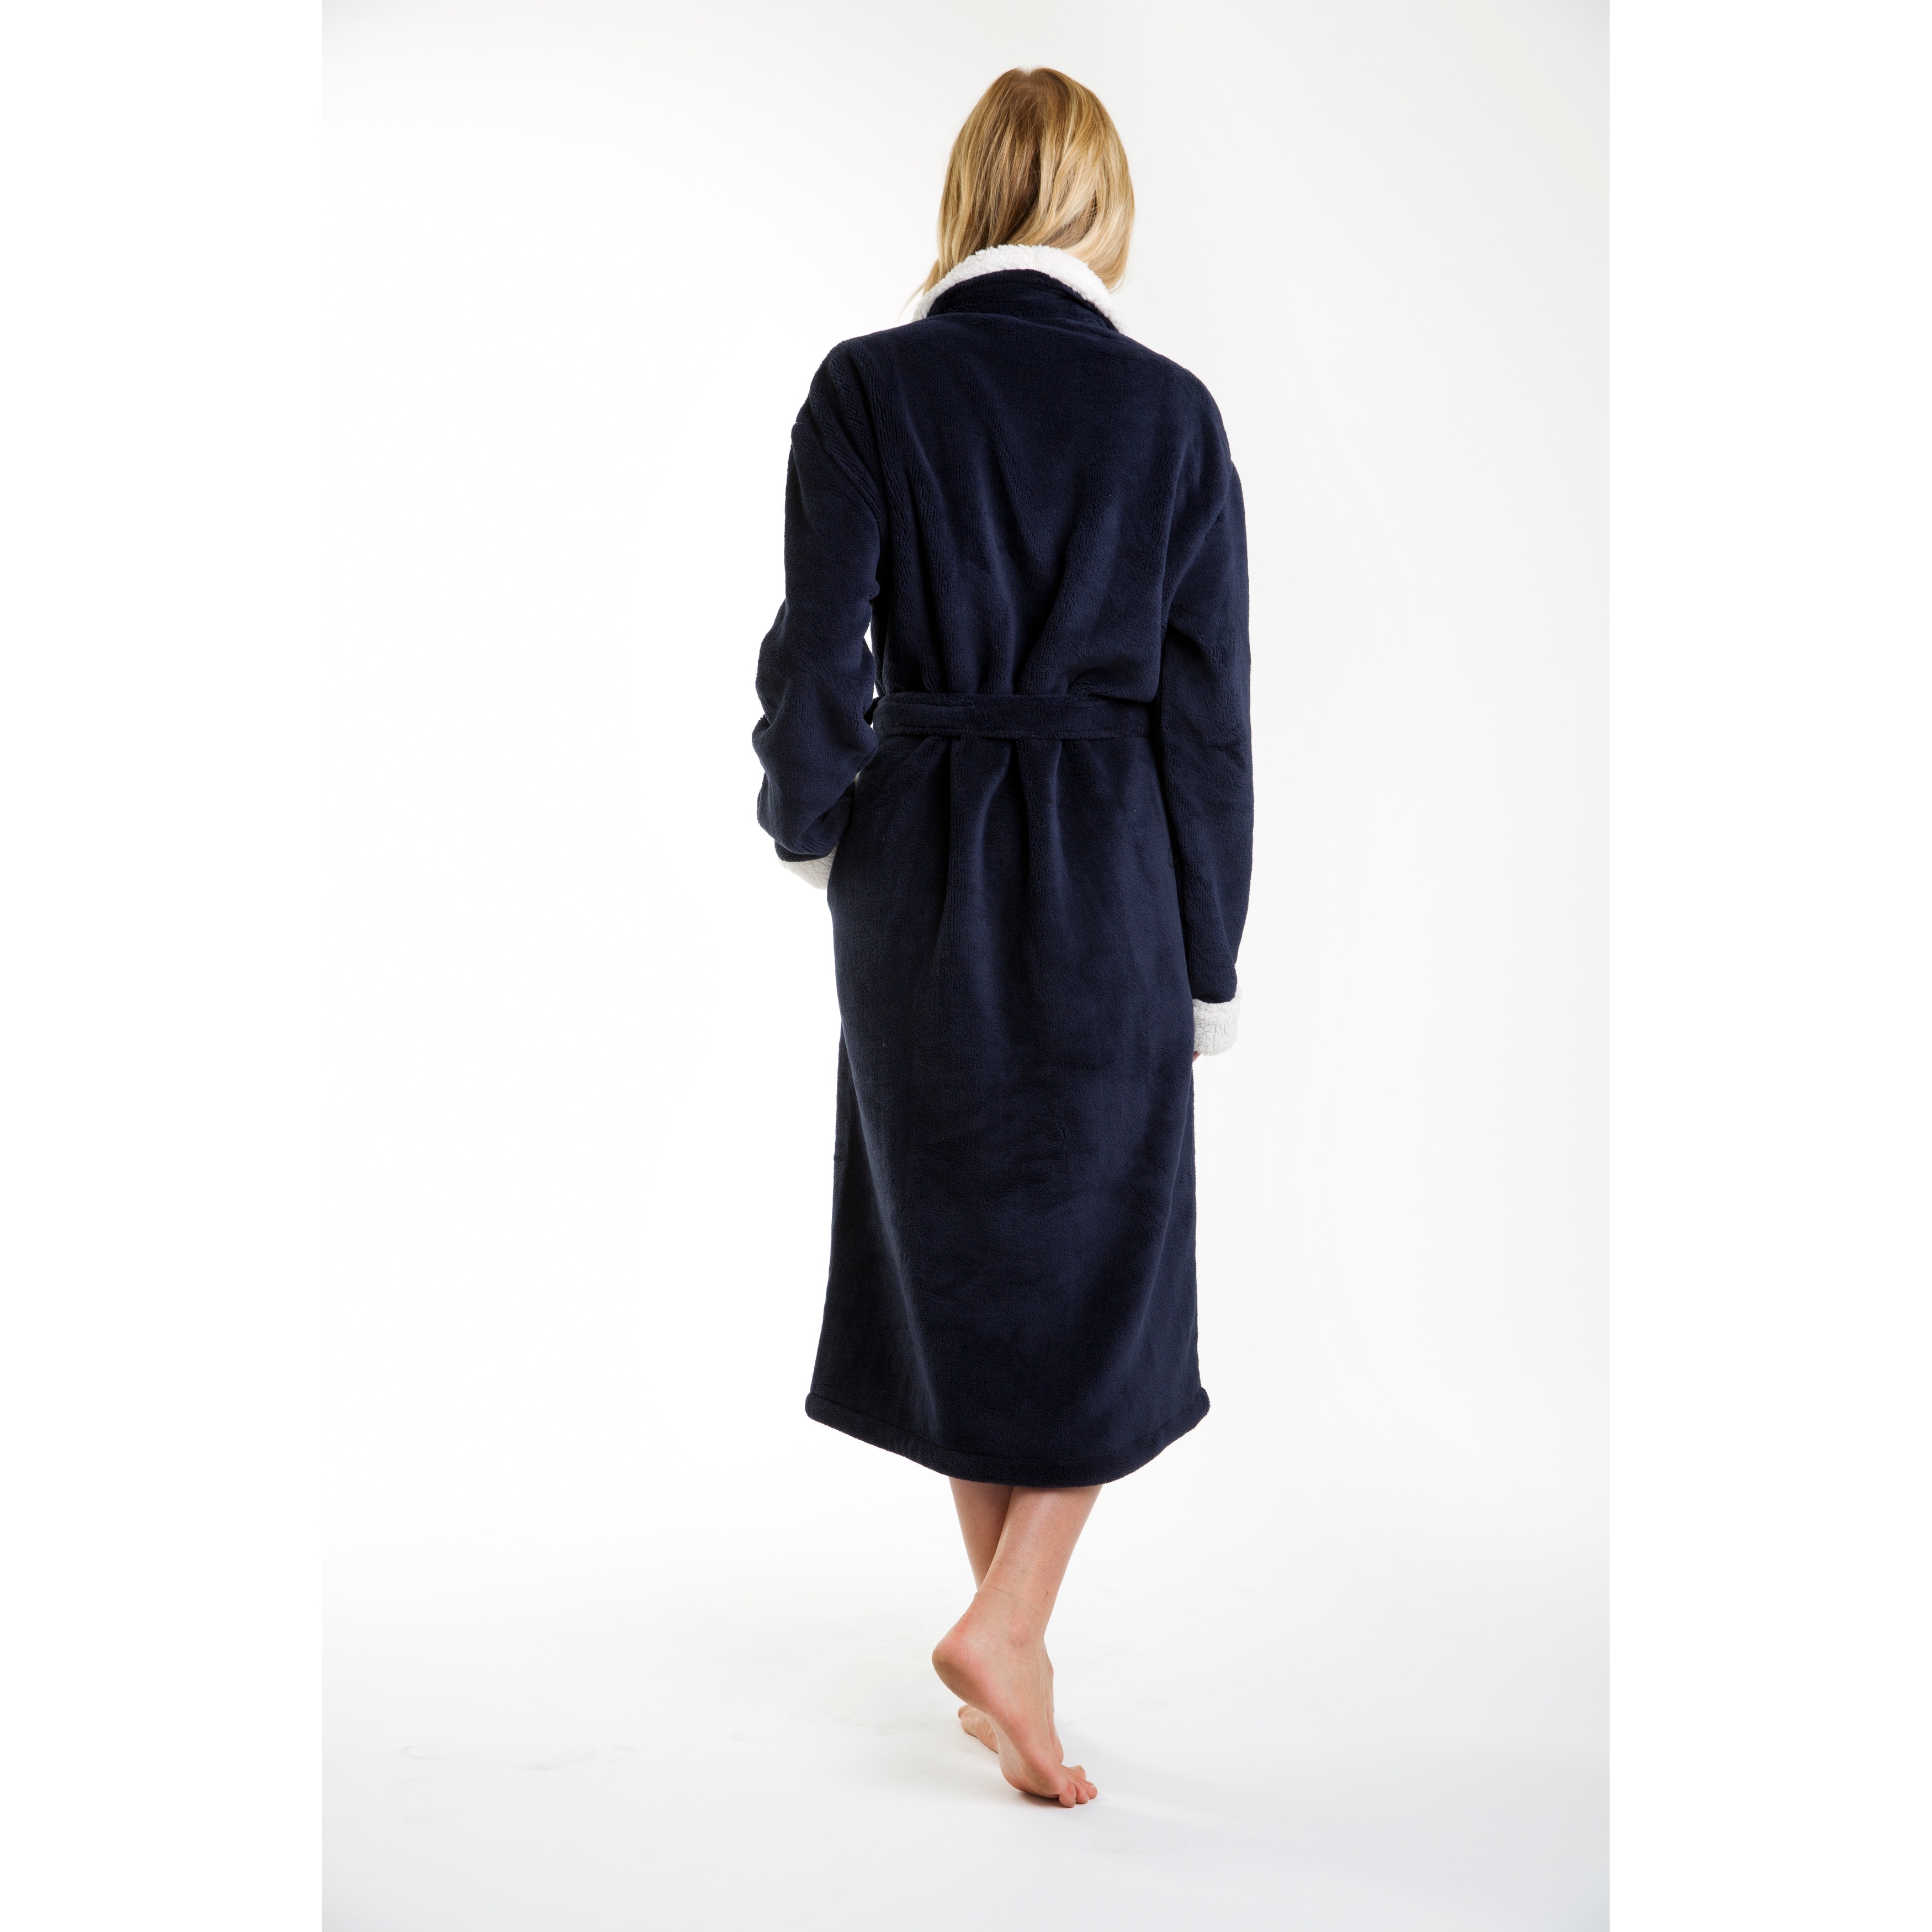  BNisBM Skims Robe Womens Plush Soft Robe Fluffy Thick Nightgown  with Pockets Full Length Collar Shawl Sherpa Robe Pjs Robe And Pajama Set  For Women : Sports & Outdoors